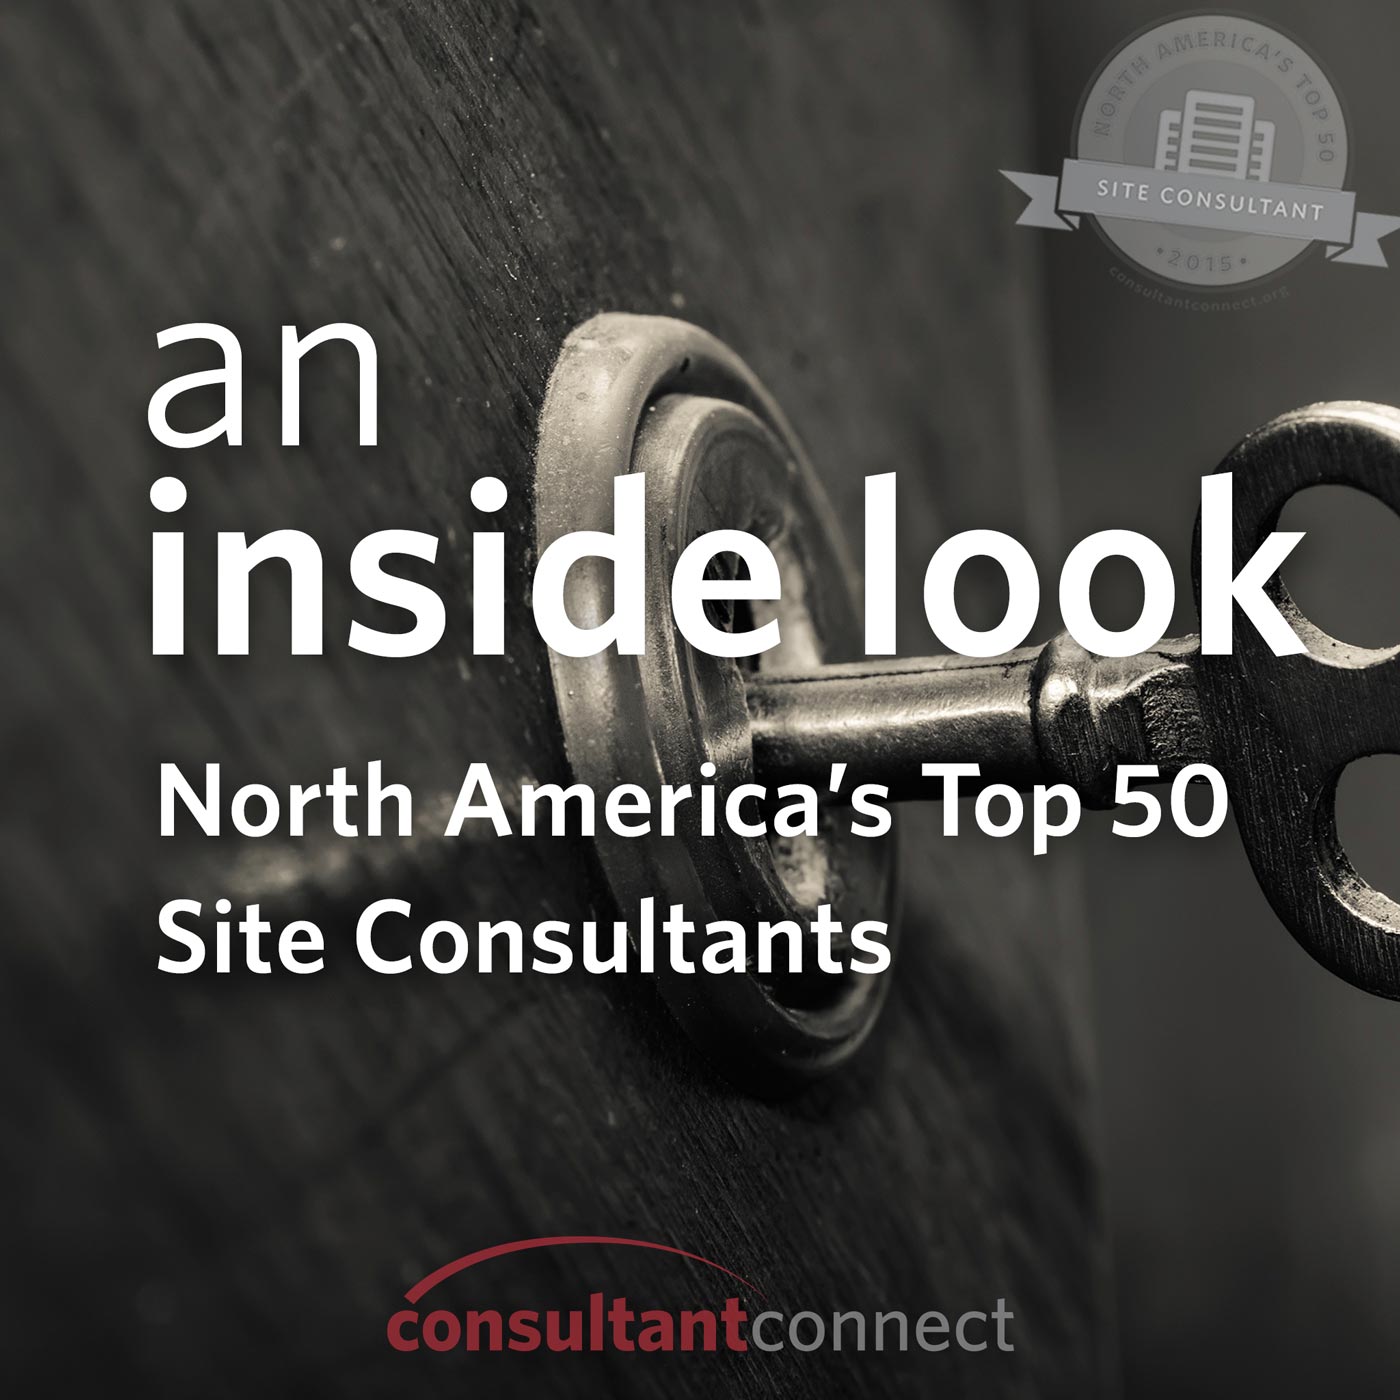 An Inside Look: North America’s Top 50 Site Consultants